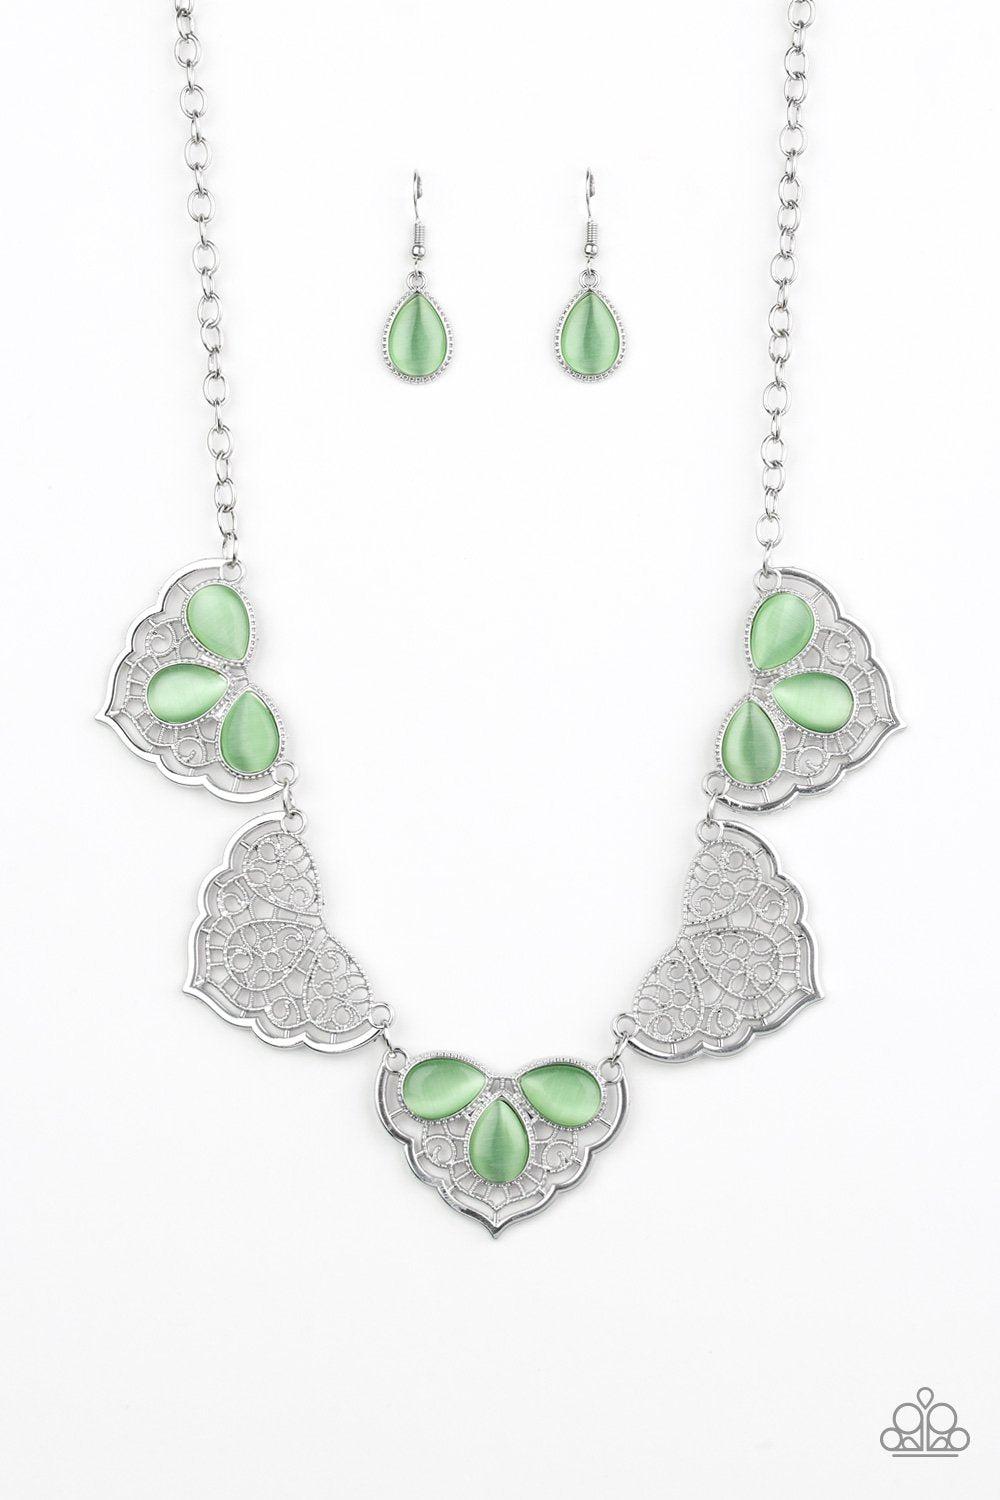 East Coast Essence Green Moonstone Necklace - Paparazzi Accessories-CarasShop.com - $5 Jewelry by Cara Jewels